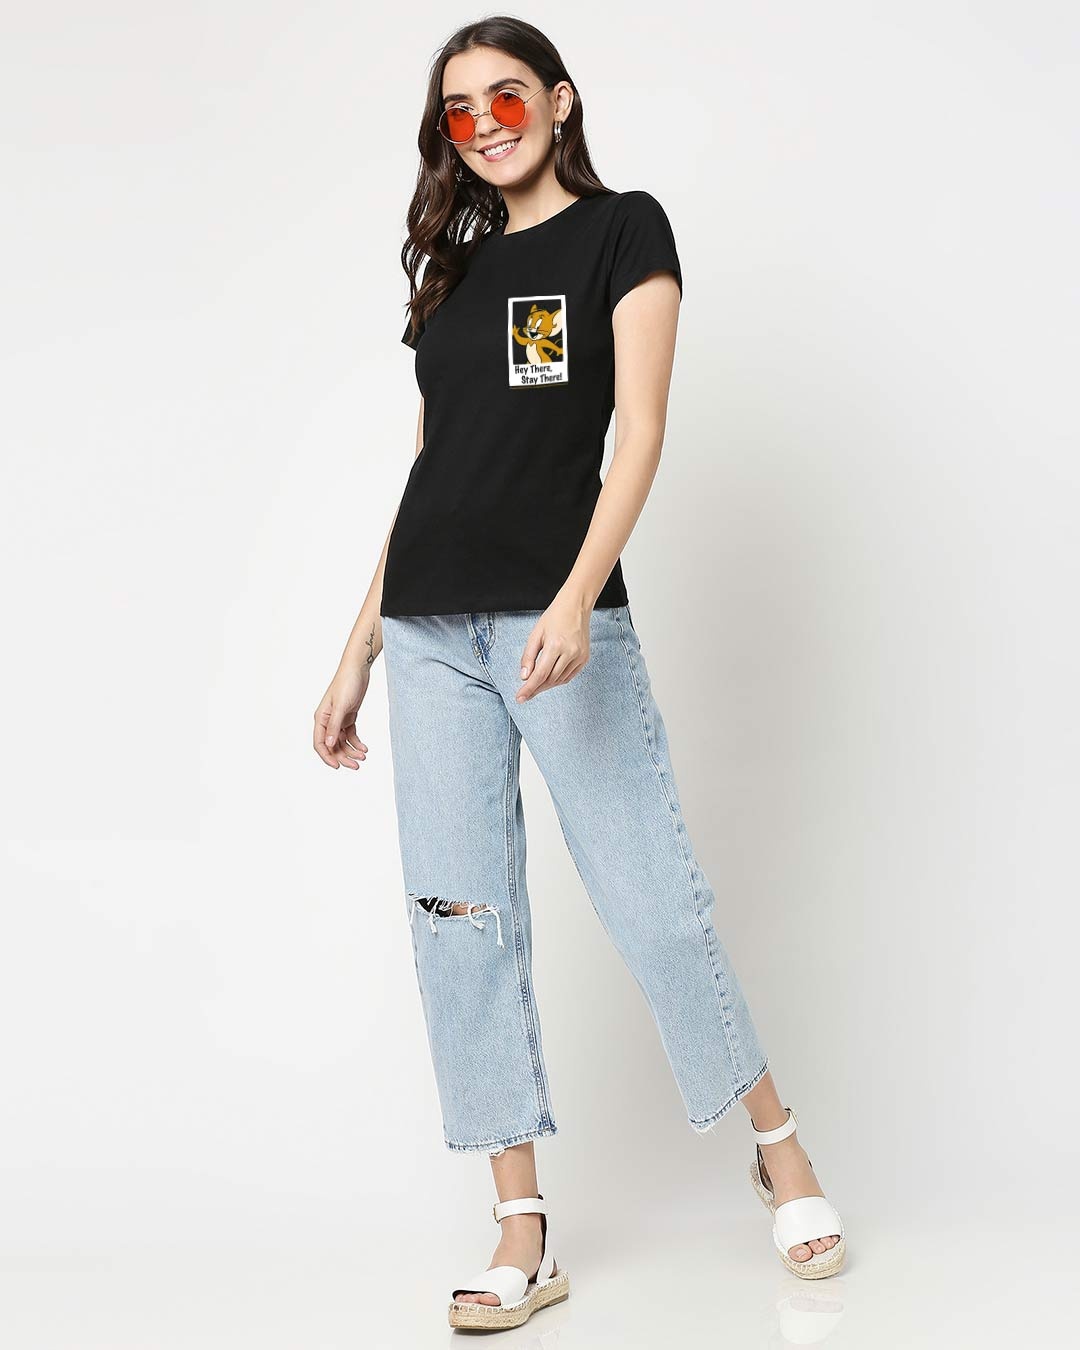 Shop Women's Black Hey There Stay There (TJL) Printed T-shirt-Design